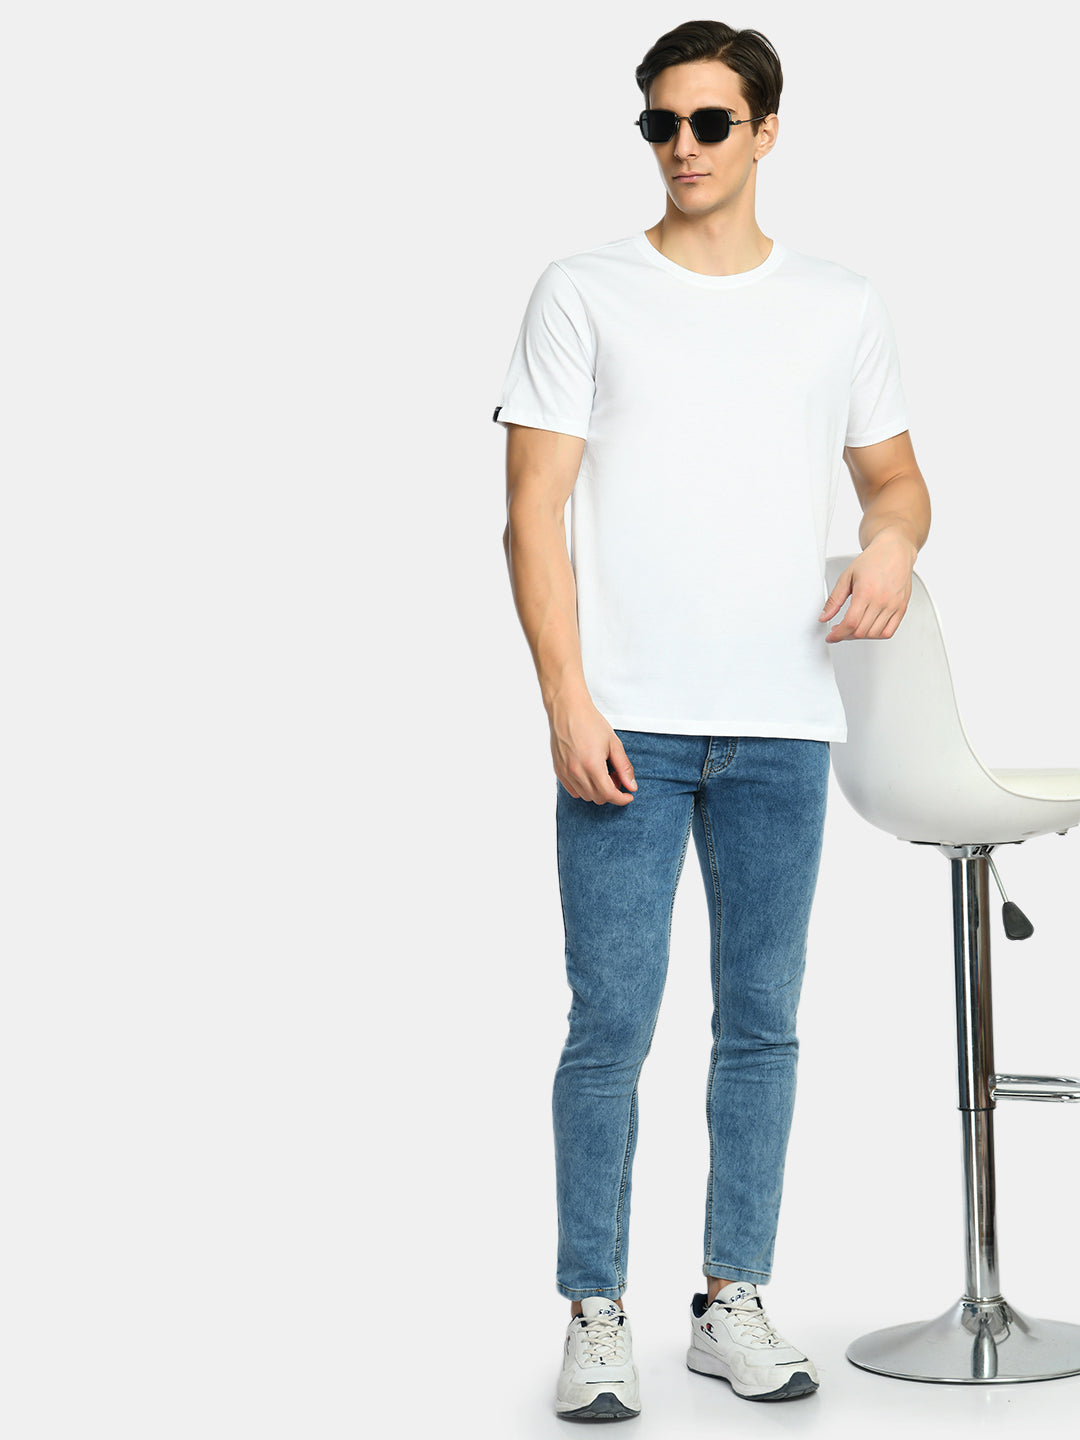 Men's Casual Pearl White Round Neck T-Shirt